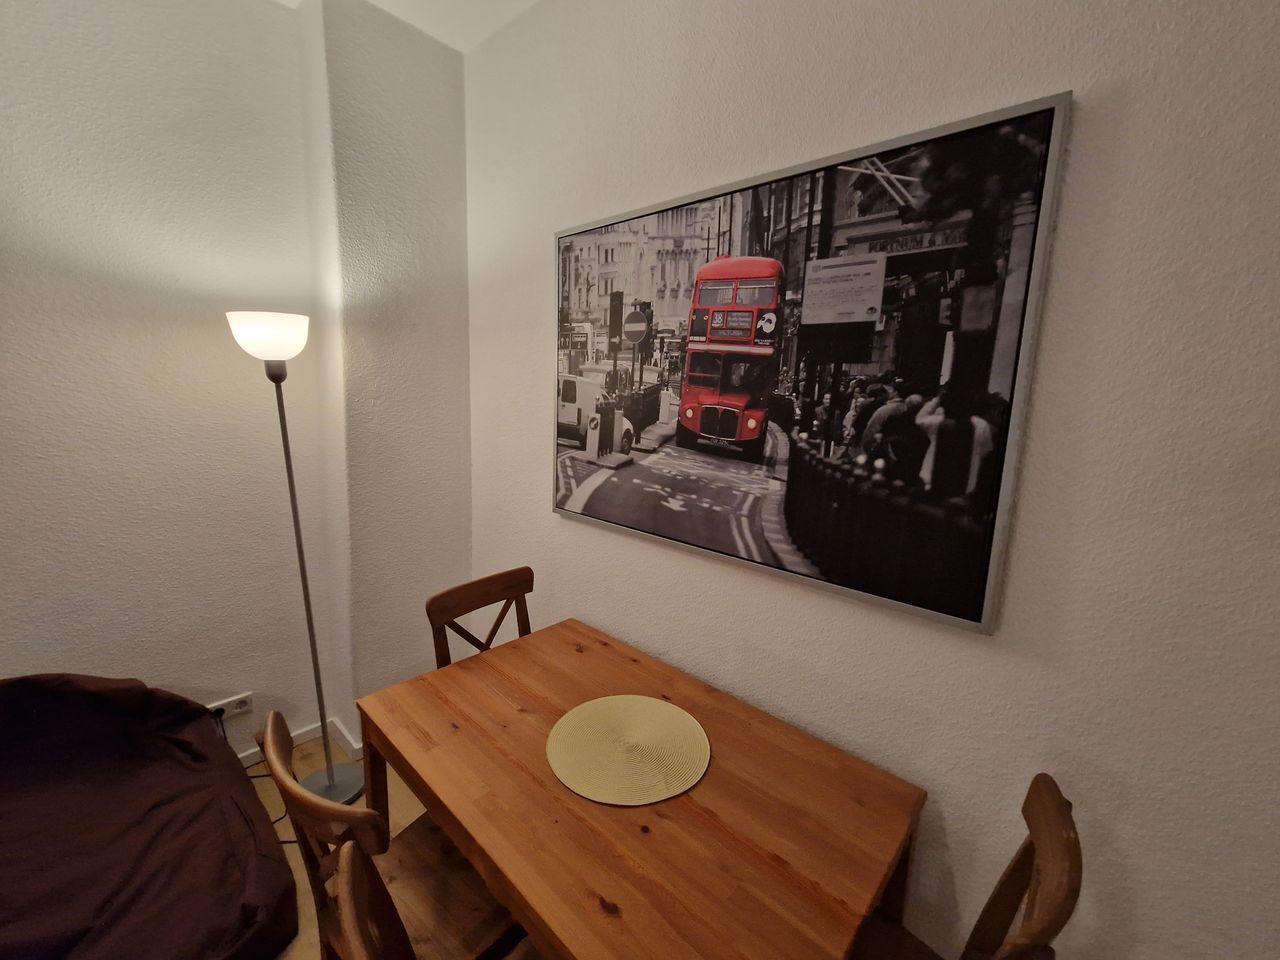 Neat, wonderful apartment in quite neighborhood ideal for sports lover and children